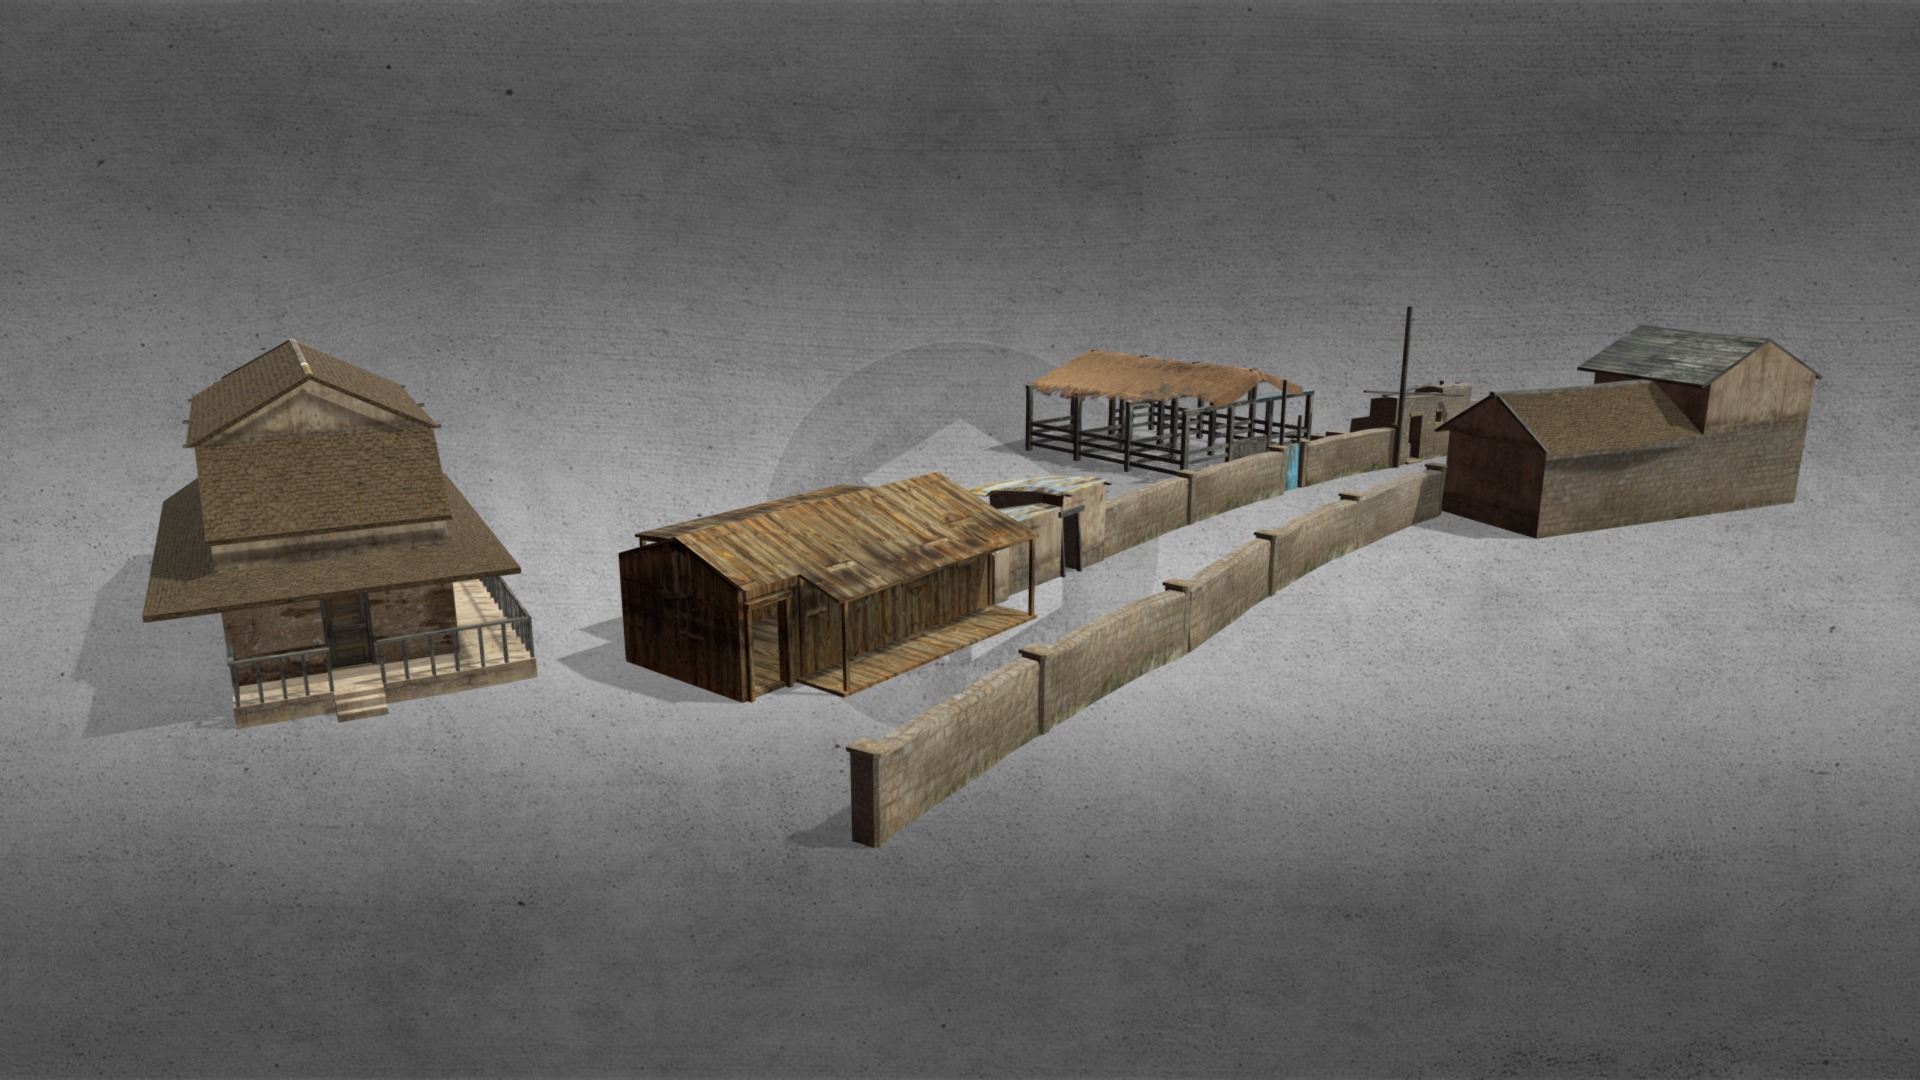 3D model Shanty 2 Farm - This is a 3D model of the Shanty 2 Farm. The 3D model is about a group of buildings in a snowy area.